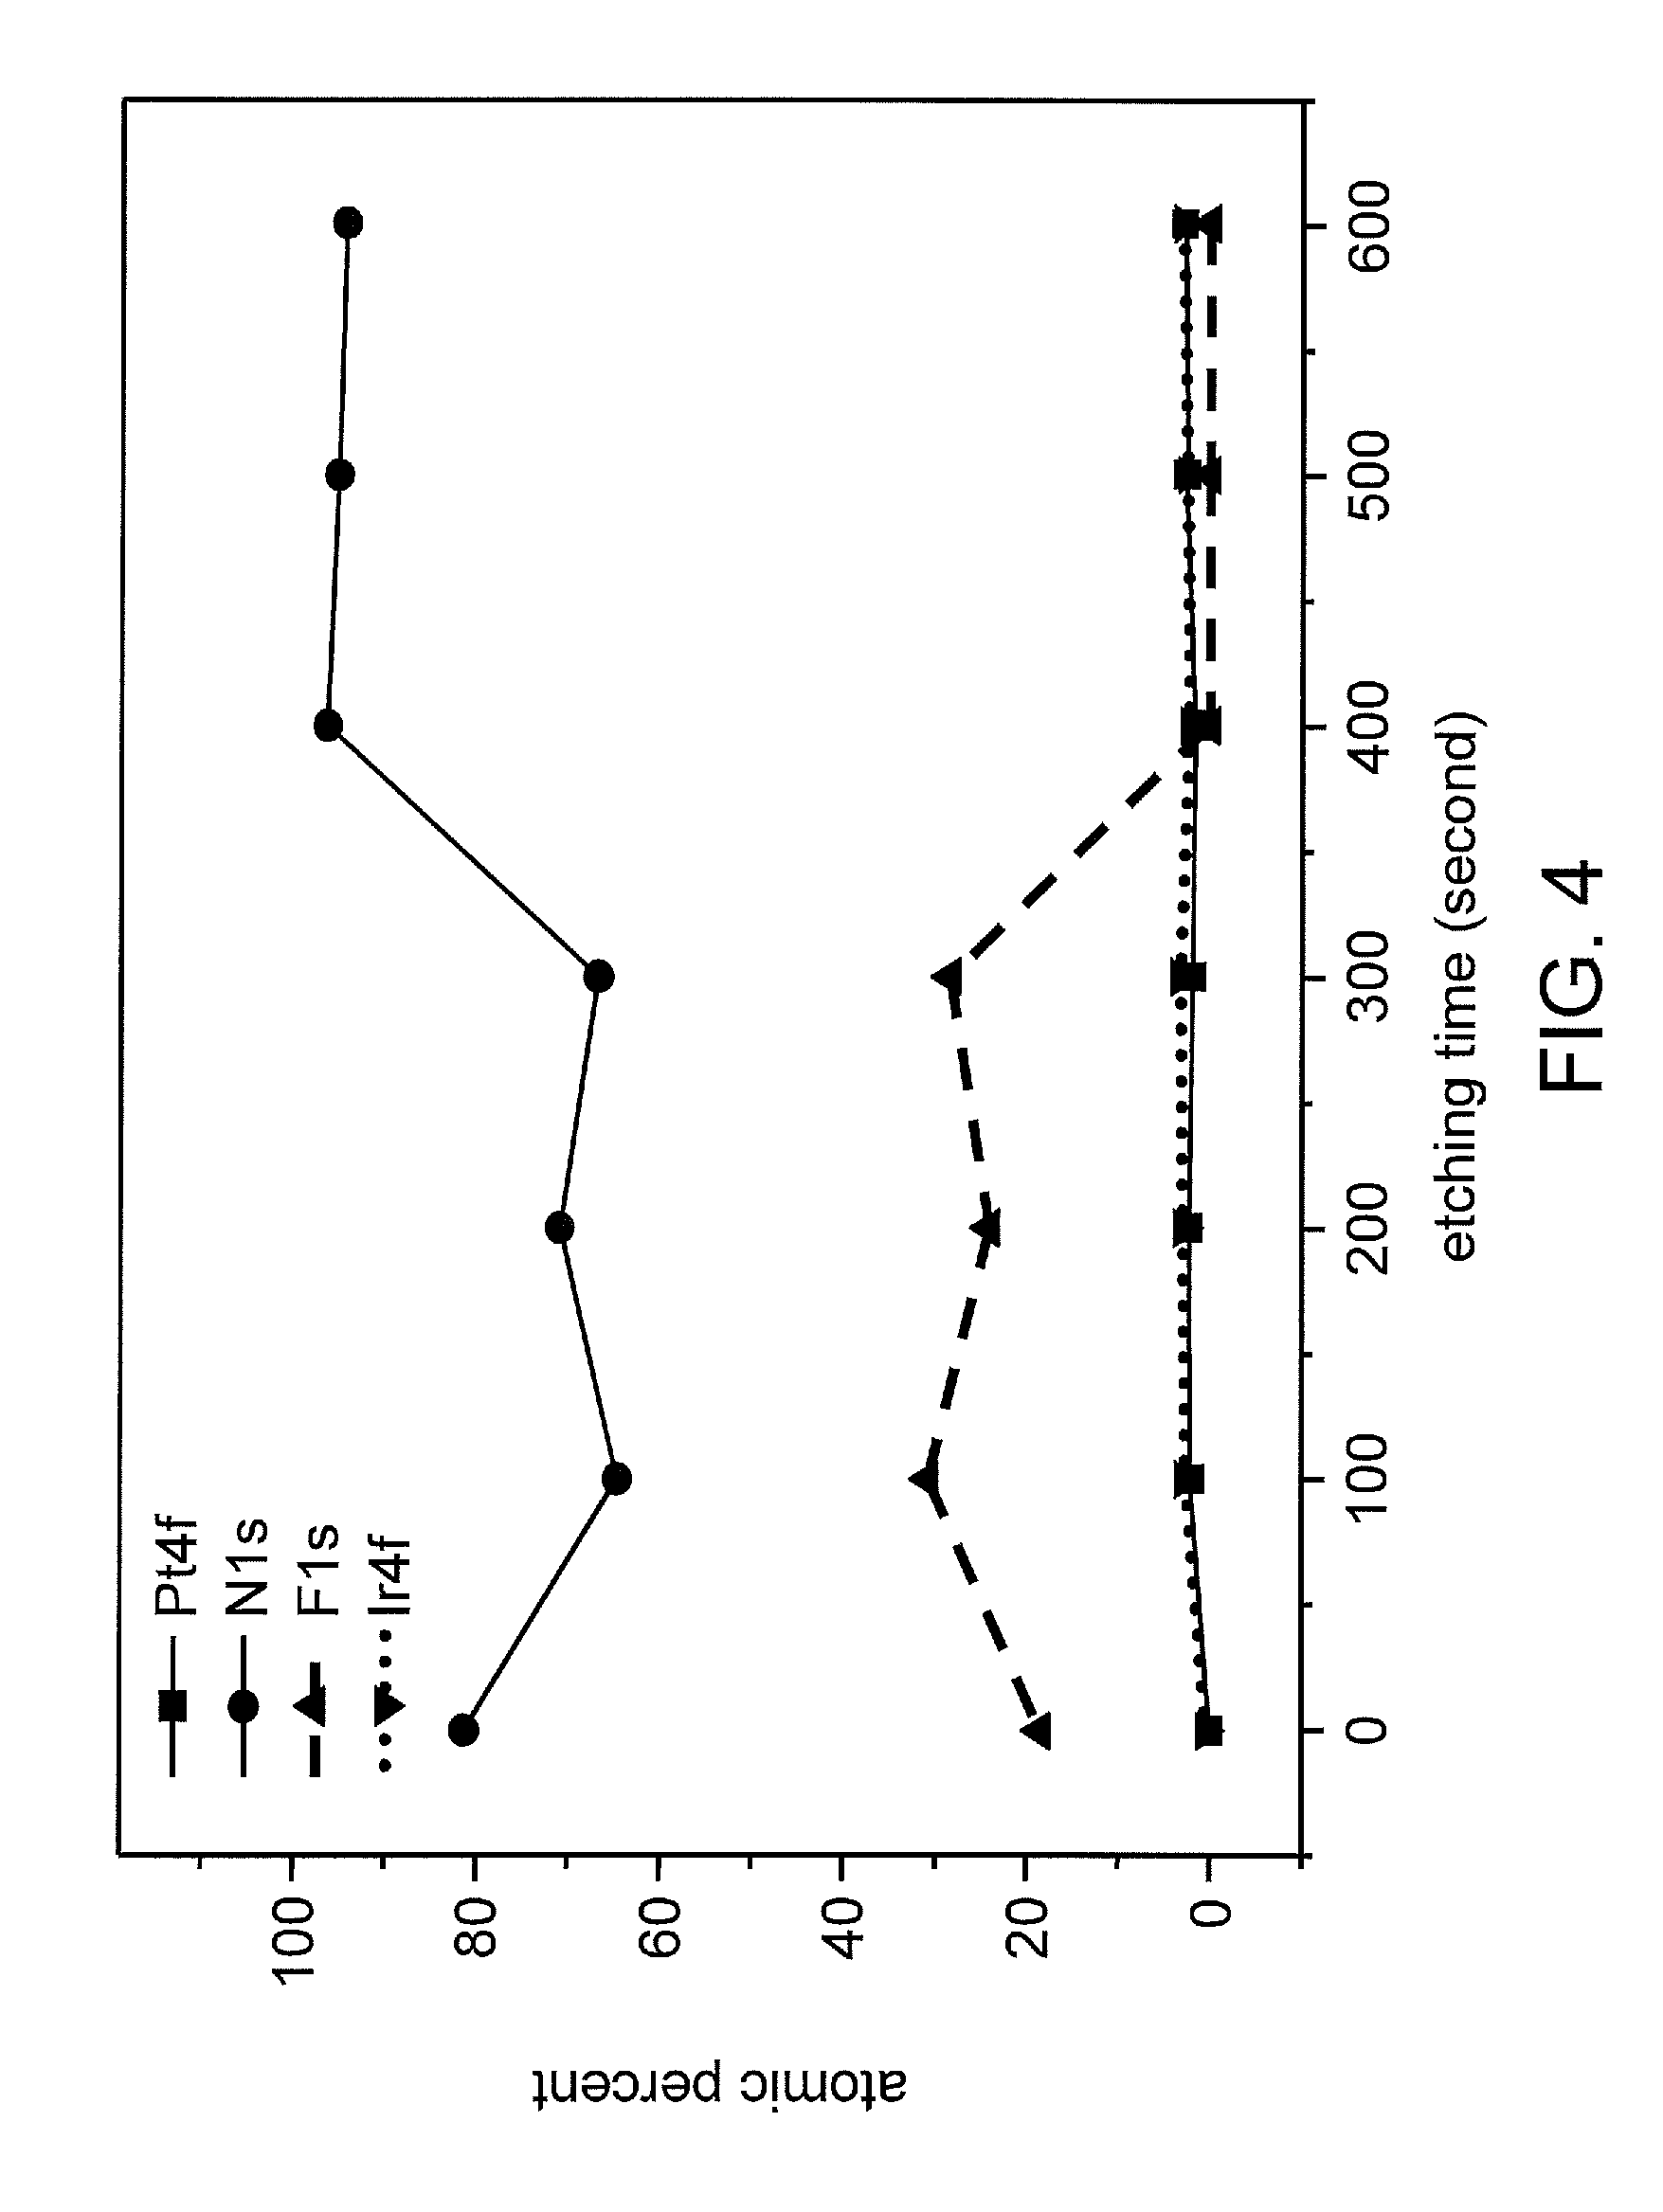 Homogeneously-structured nano-catalyst/enzyme composite electrode, fabricating method and application of the same